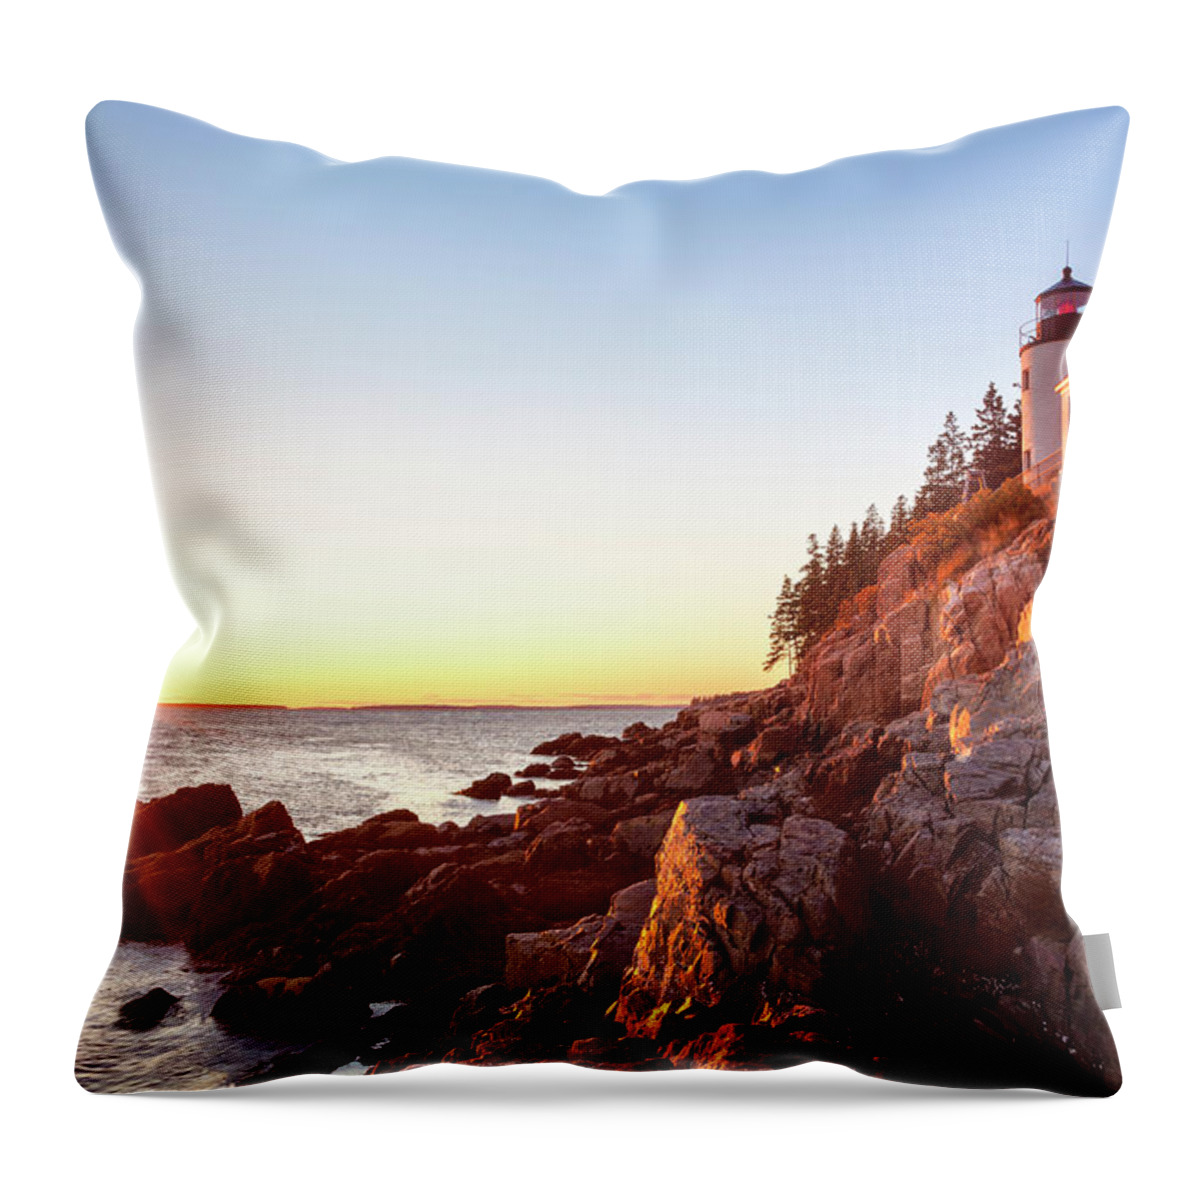 Seascape Throw Pillow featuring the photograph Bass Harbor Lighthouse Sunset, Acadia by Picturelake